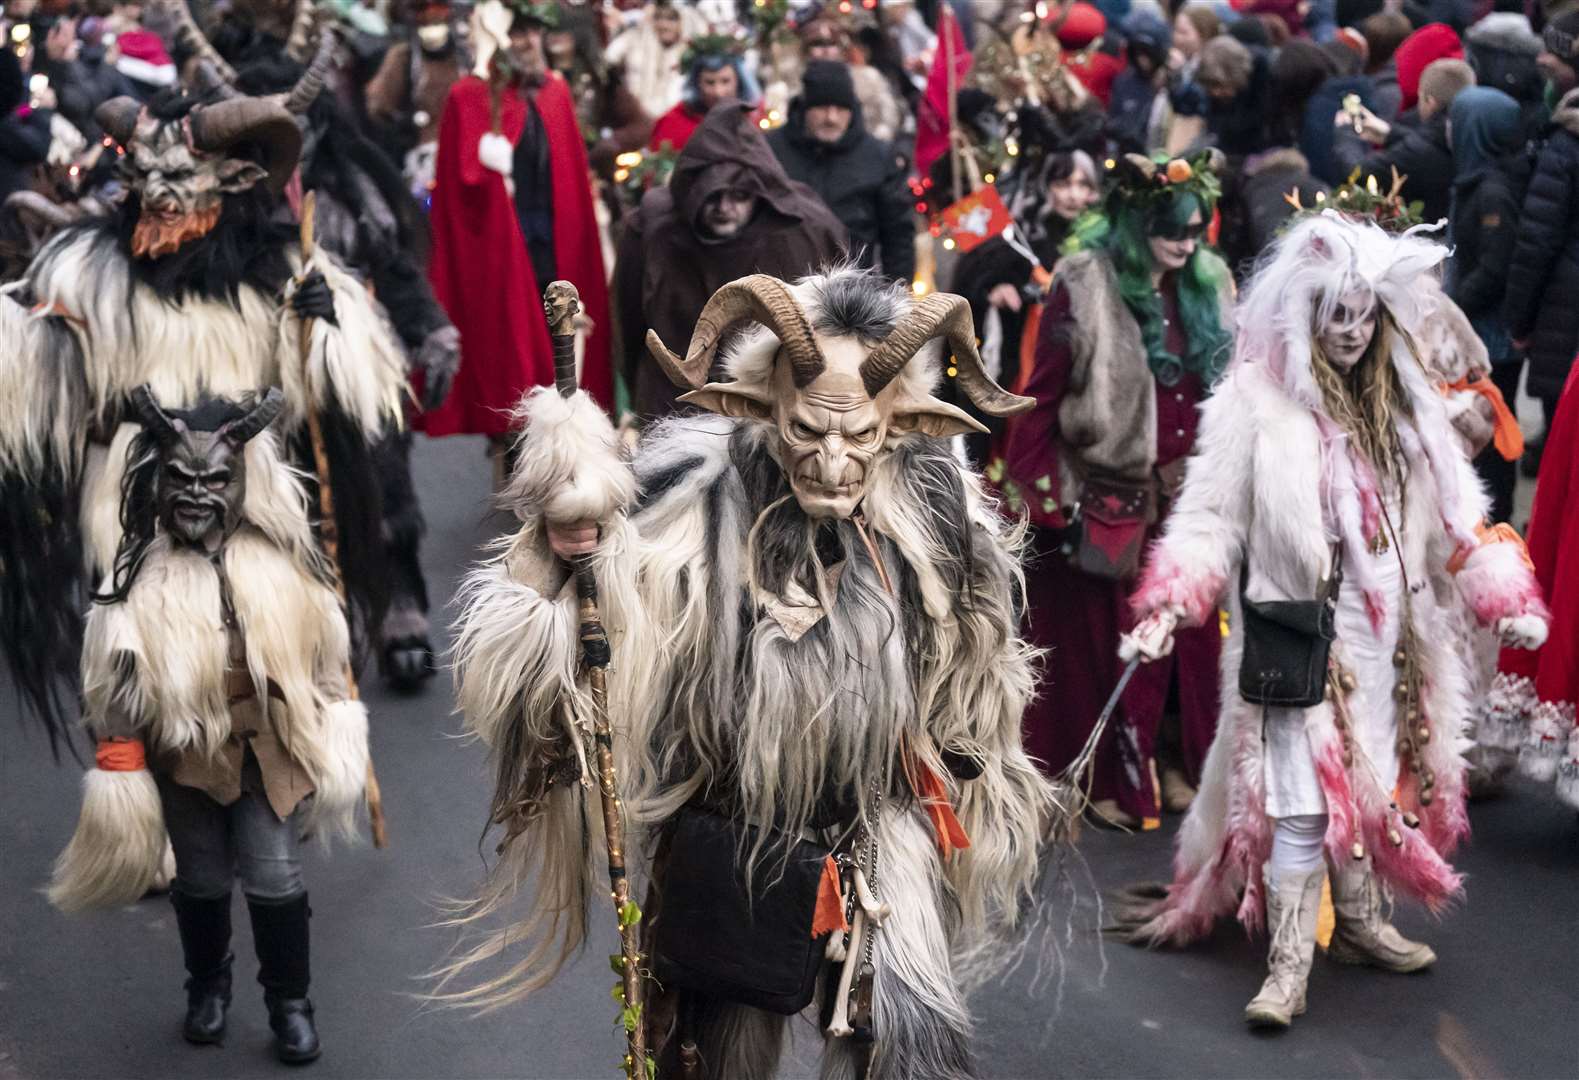 Krampus is said to terrify naughty children during the festive season (PA)